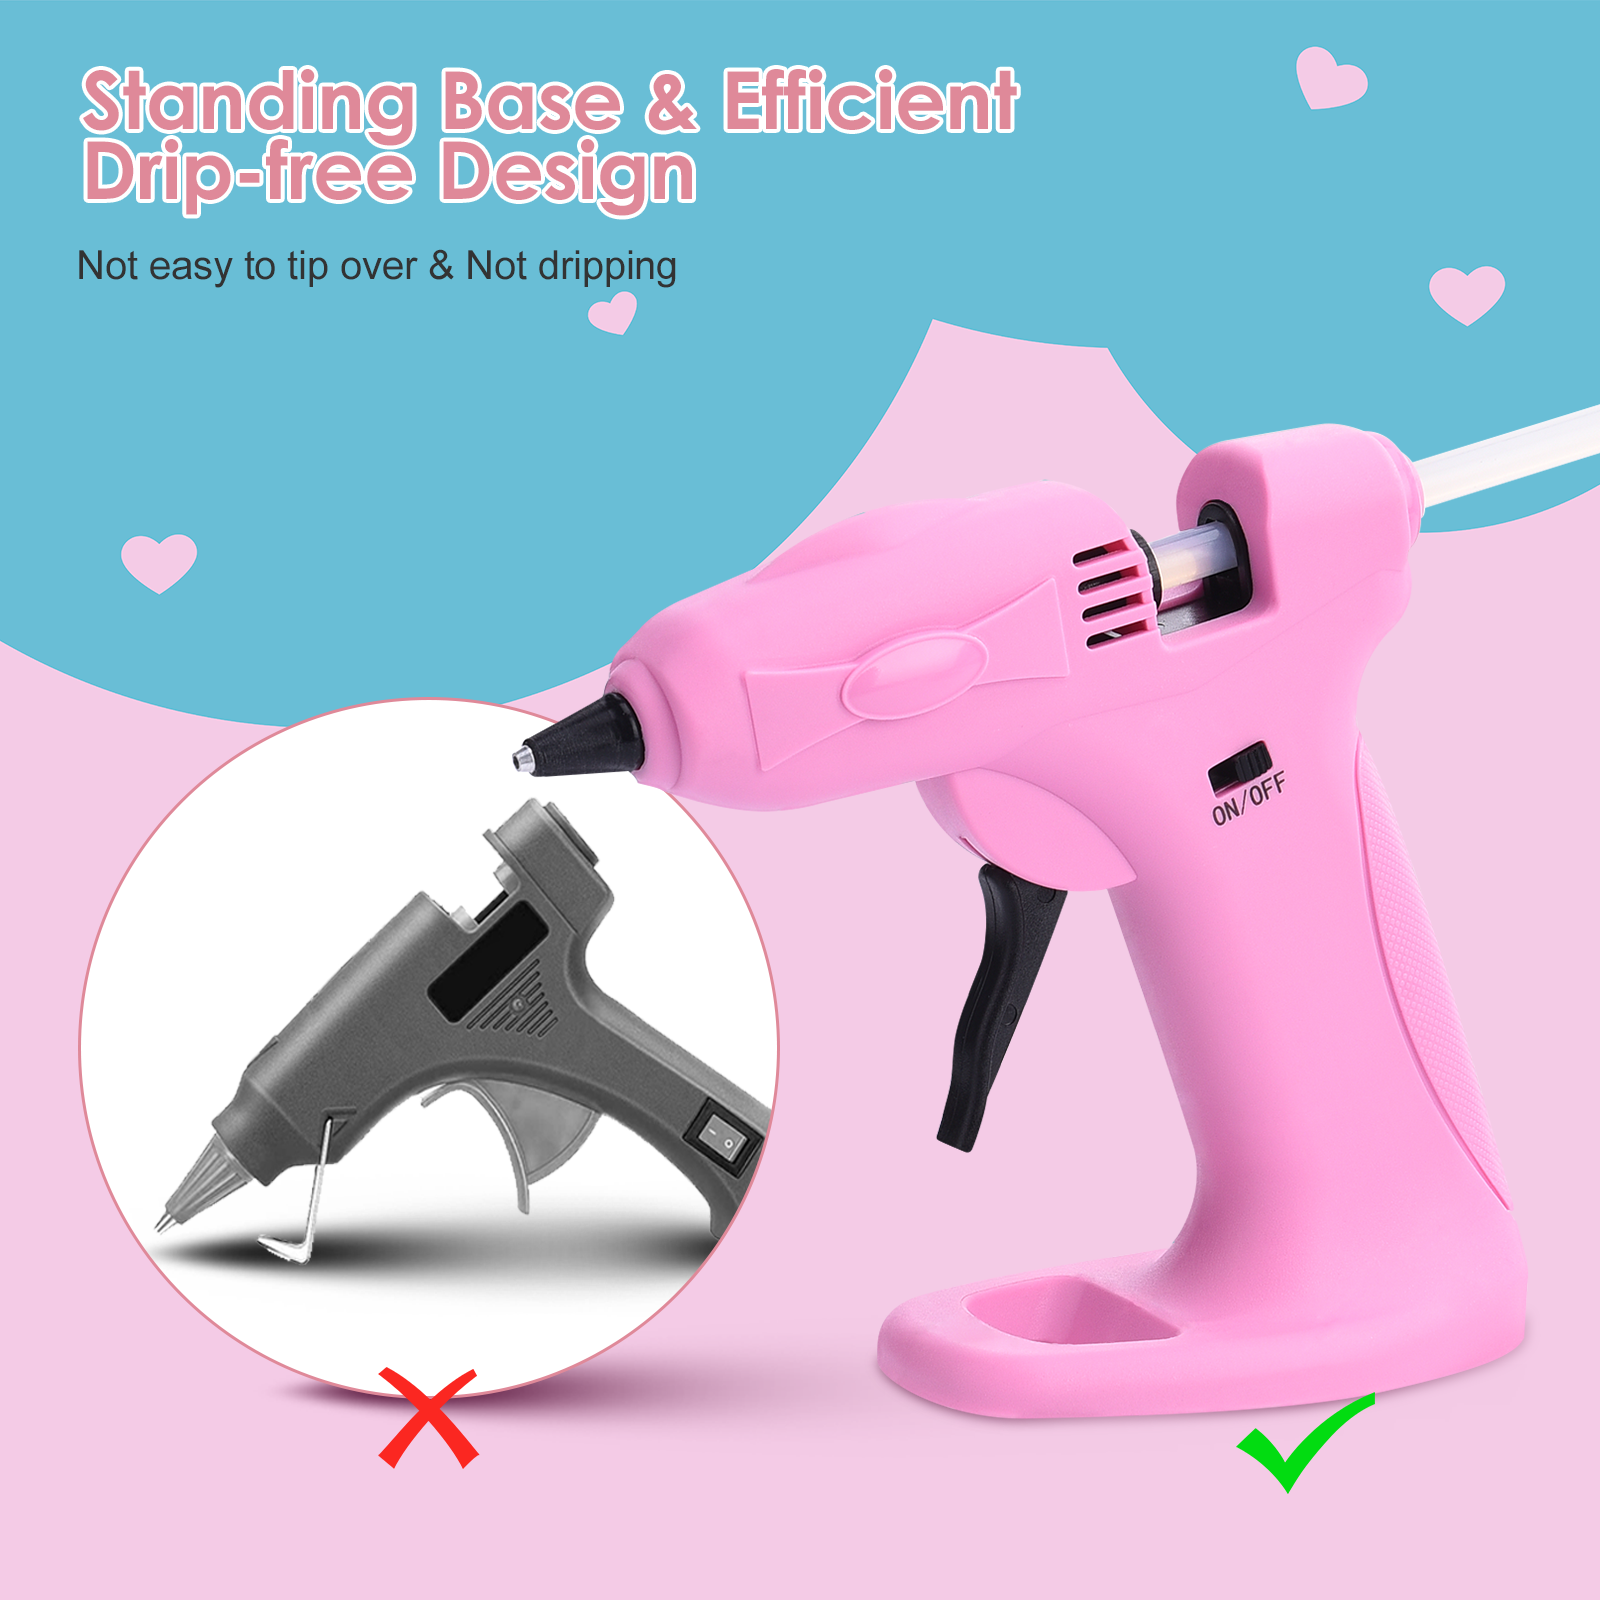 Hot Melt Cordless Glue Gun with 30 Glue Sticks & 3 Finger Protectors | USB Rechargeable Hot Glue Gun with Charging Stand for Craft Projects & Quick